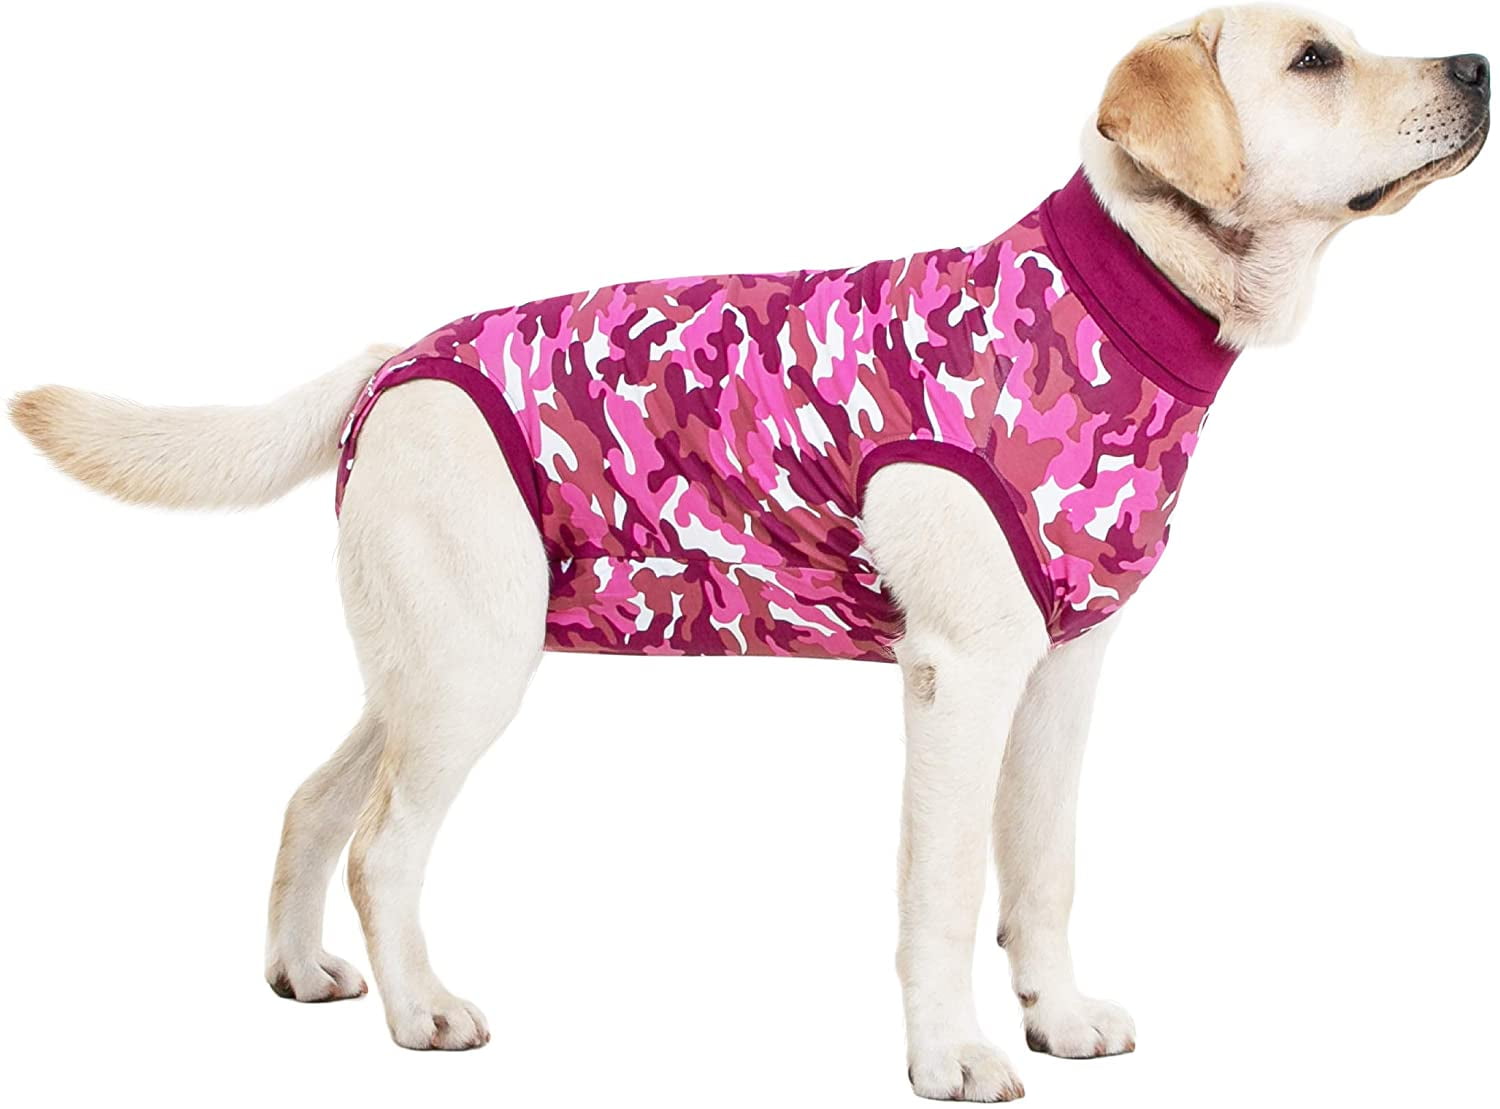 SUITICAL Recovery Suit for Dogs, Pink Camo, Medium 